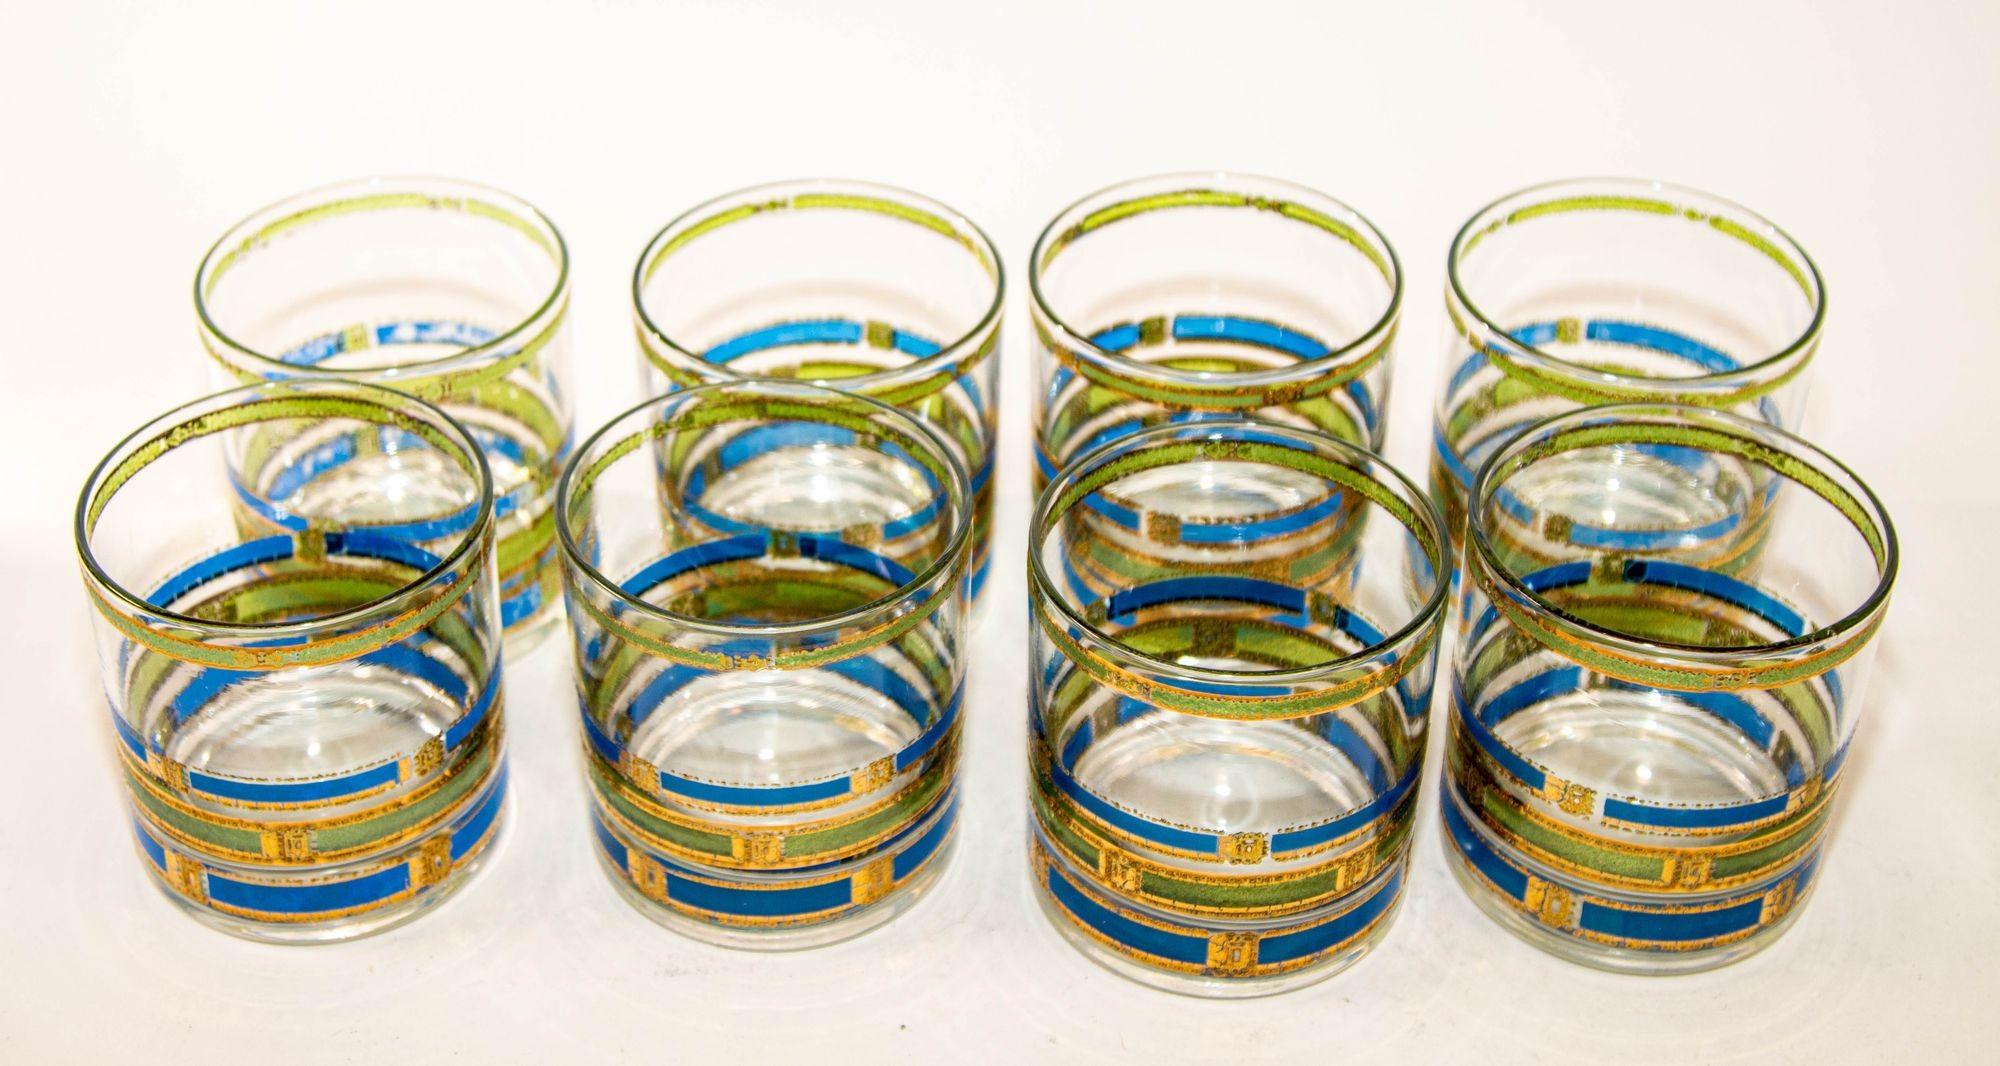 Vintage Set of Eight Rock Glasses Blue, Green and Gold by Culver Ltd.
1960s Culver 